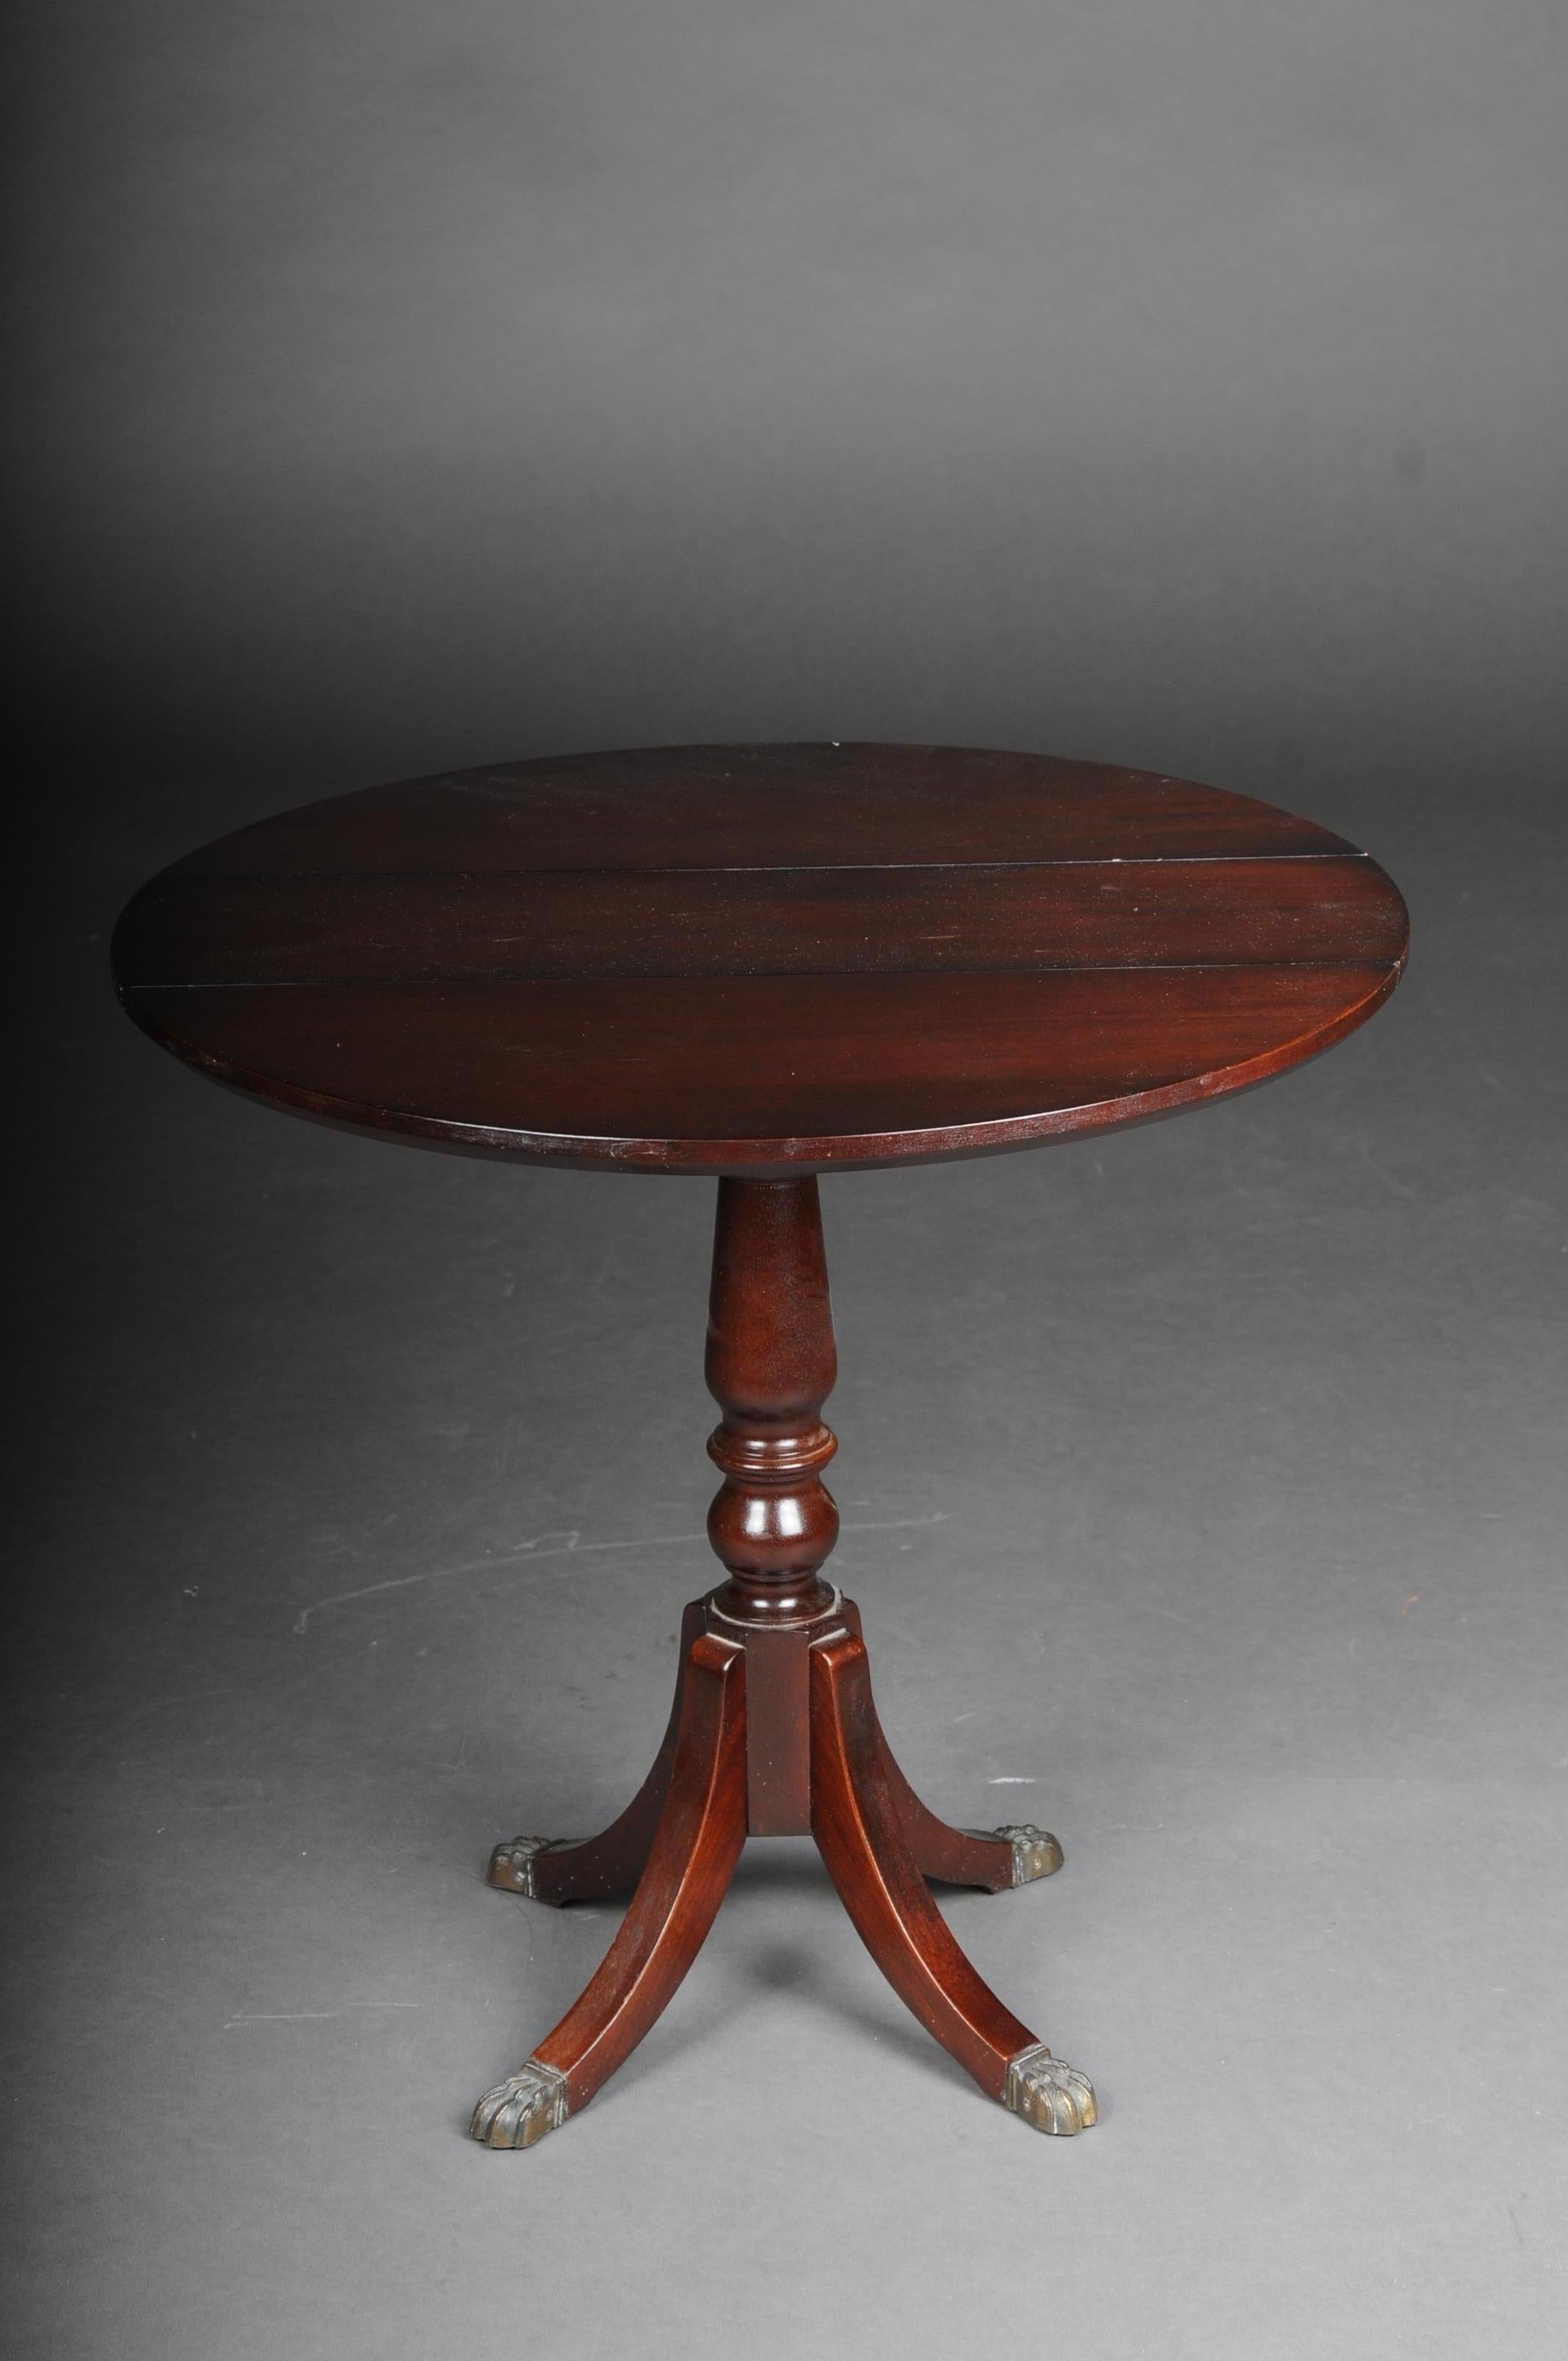 English folding table / side table / table, 20th century

Solid wood stained with mahogany. English side table, 20th century, Victorian style. Round cover plate. Pages can be opened. Round cover plate on profiled balustrade shaft ending on four